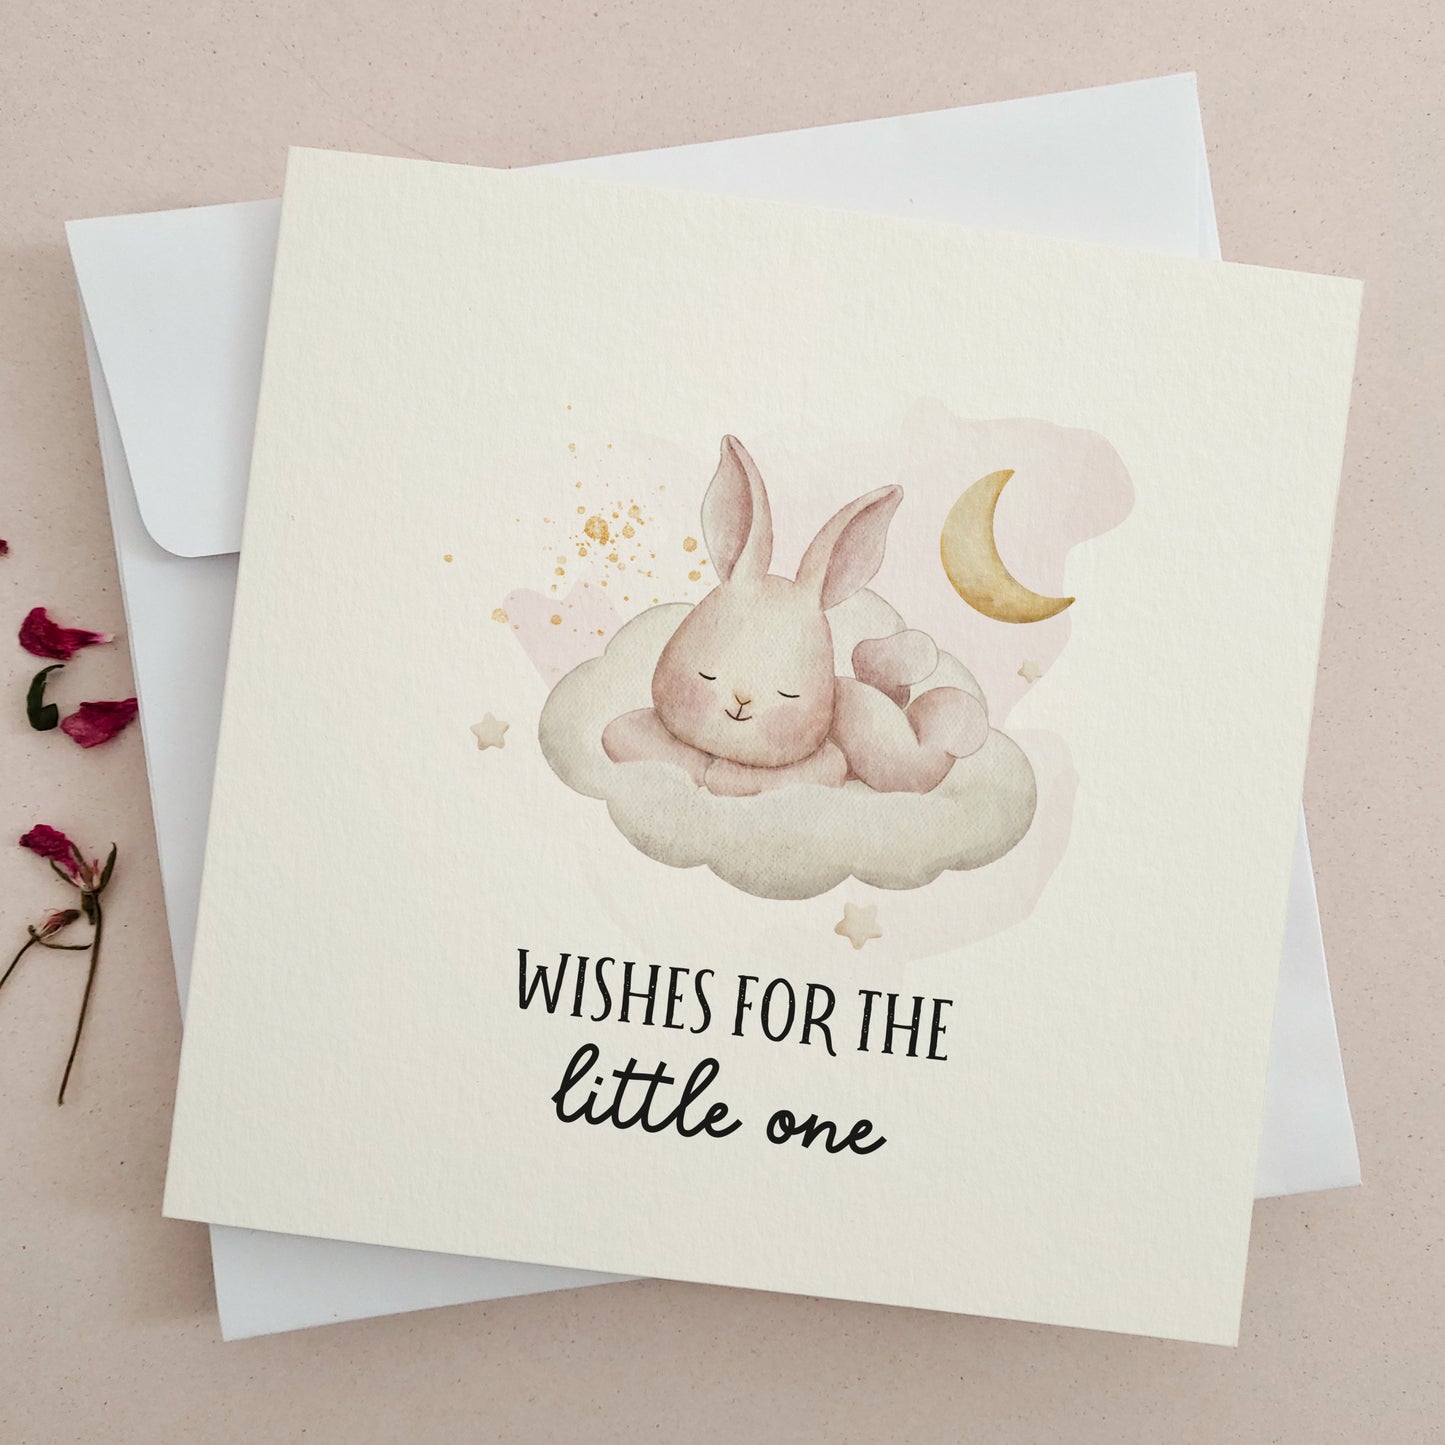 wishes for the little one card to congratulate on a new baby girl - xoxokristen